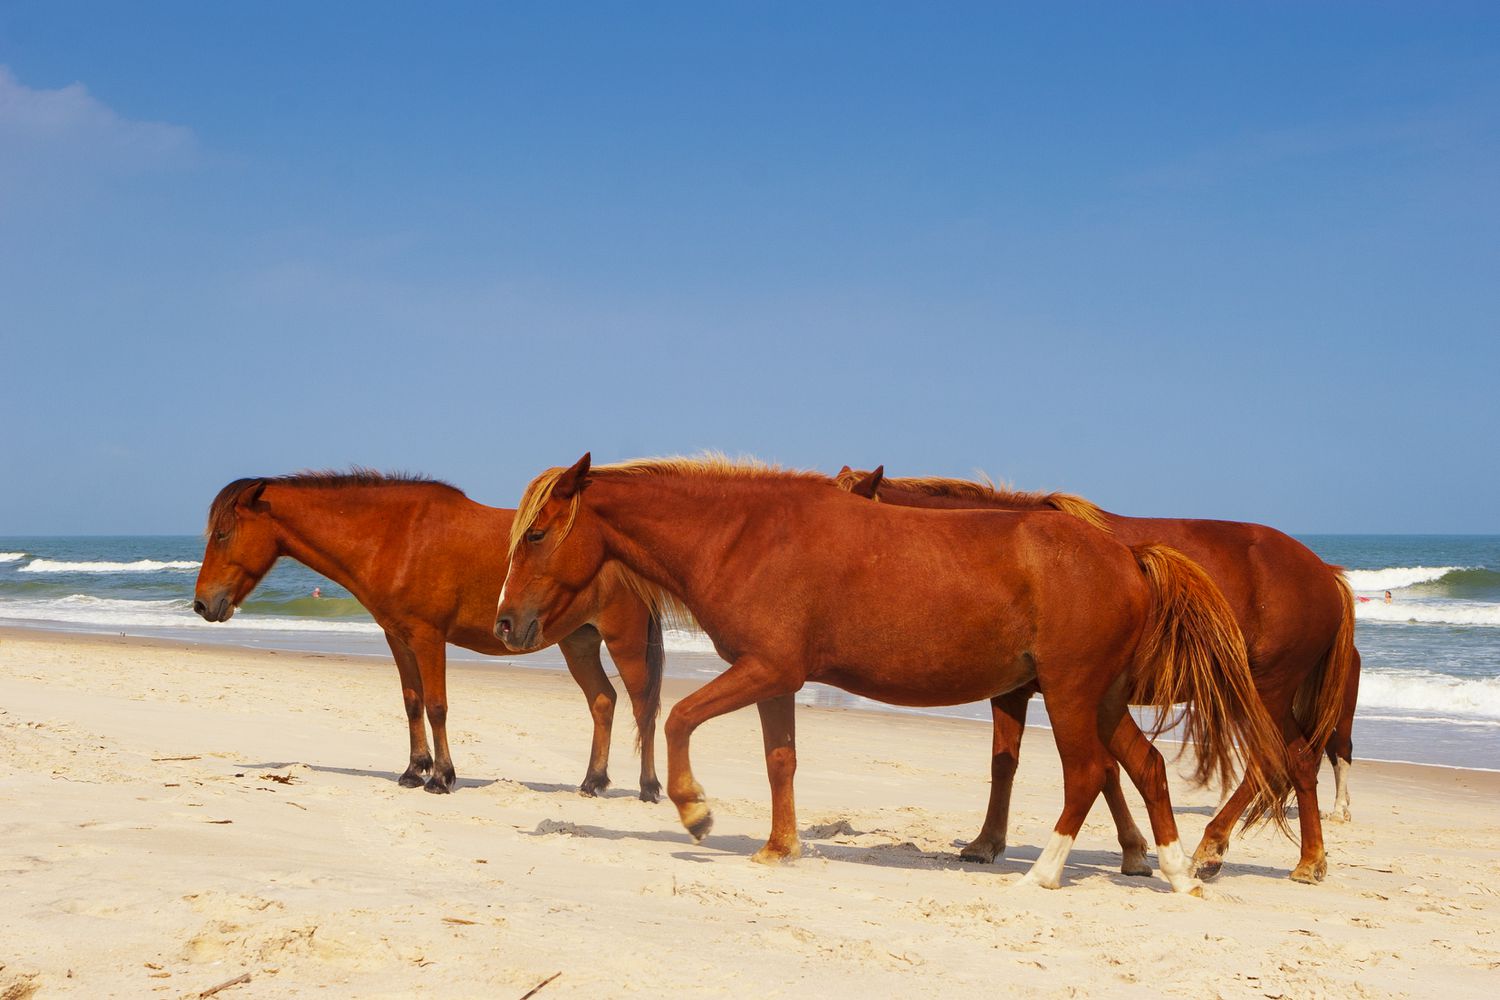 Wild horses roam freely at Assateague Island beach, a long barrier island off the Atlantic Coast in the state of Maryland, USA.